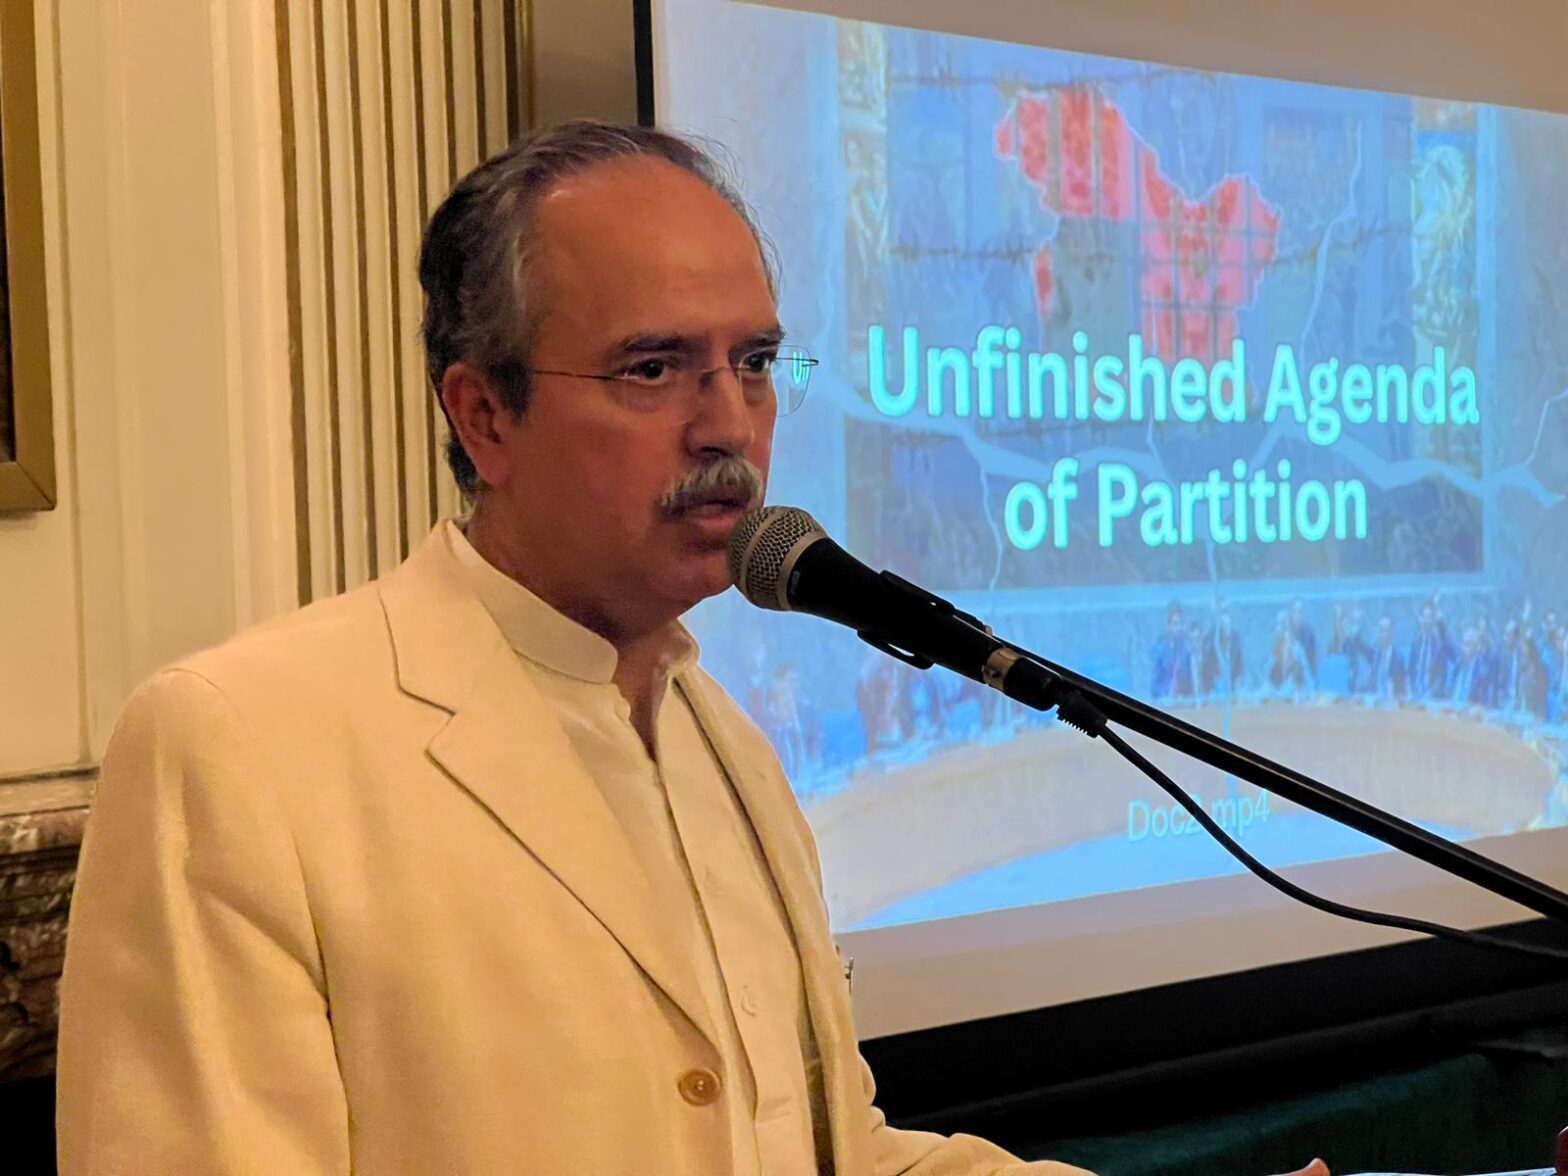 Speakers demand reversal of Indian illegal actions of August 5, 2019